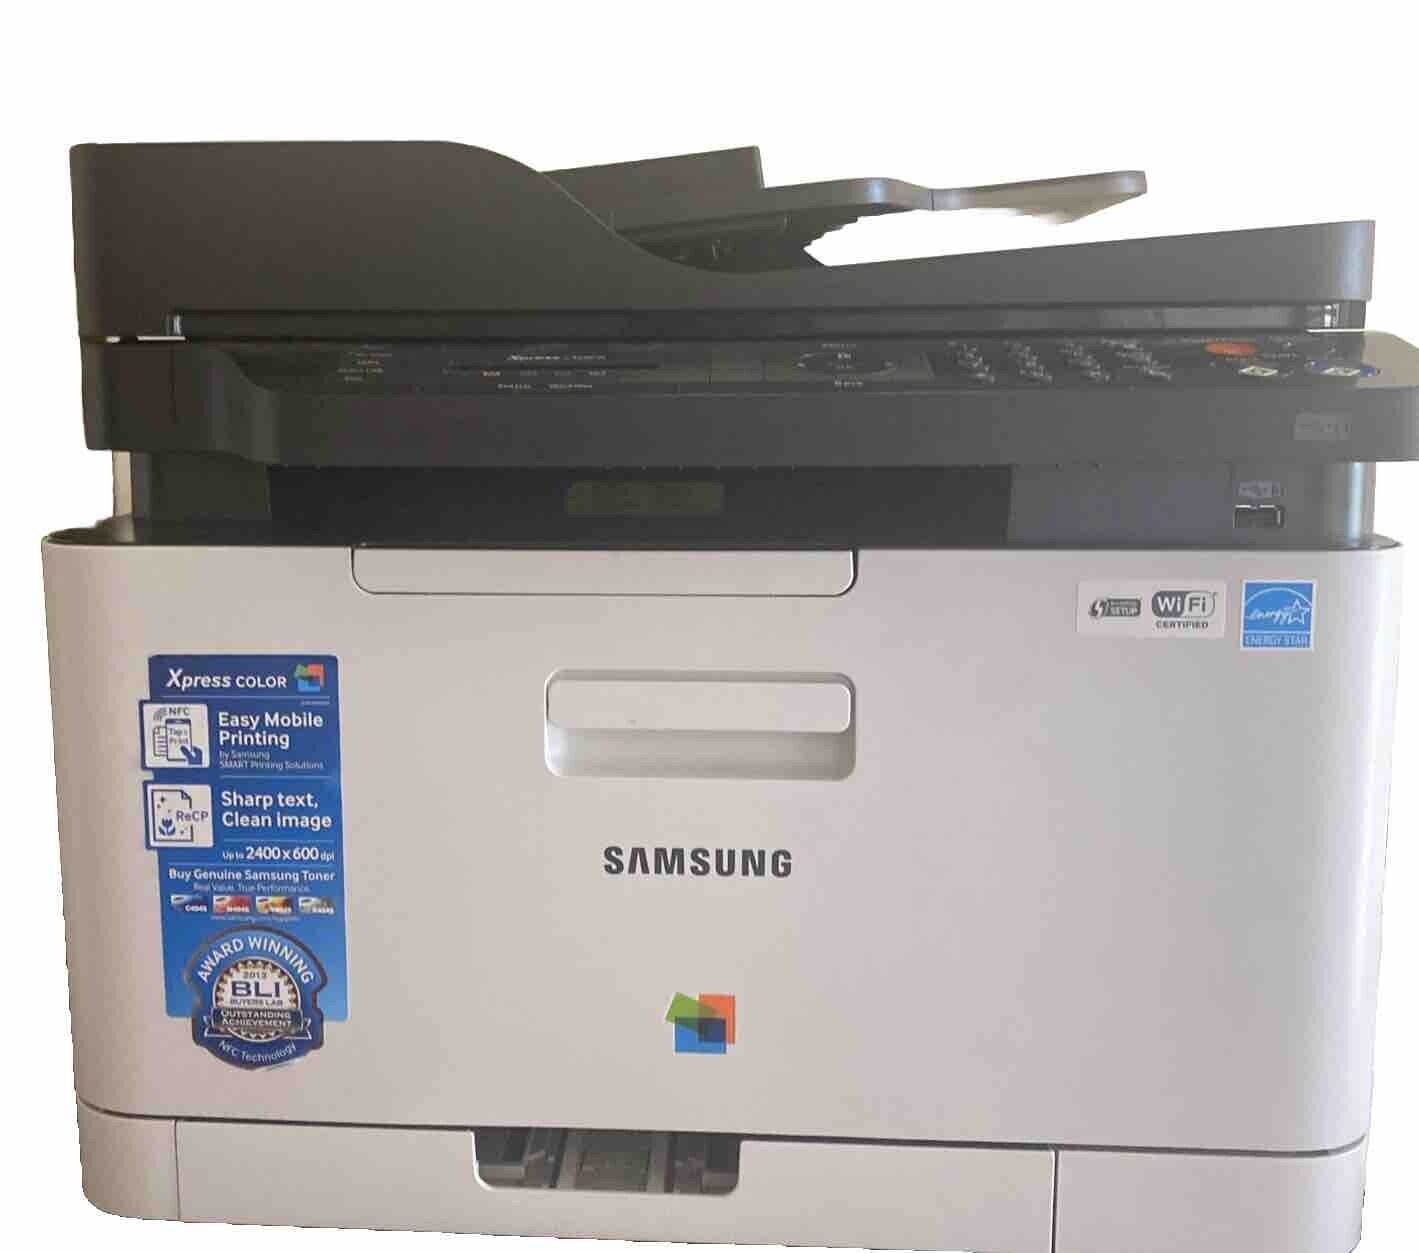 Samsung Xpress SL-C480FW All-in-One Color Laser Printer 4186 Pages  Low